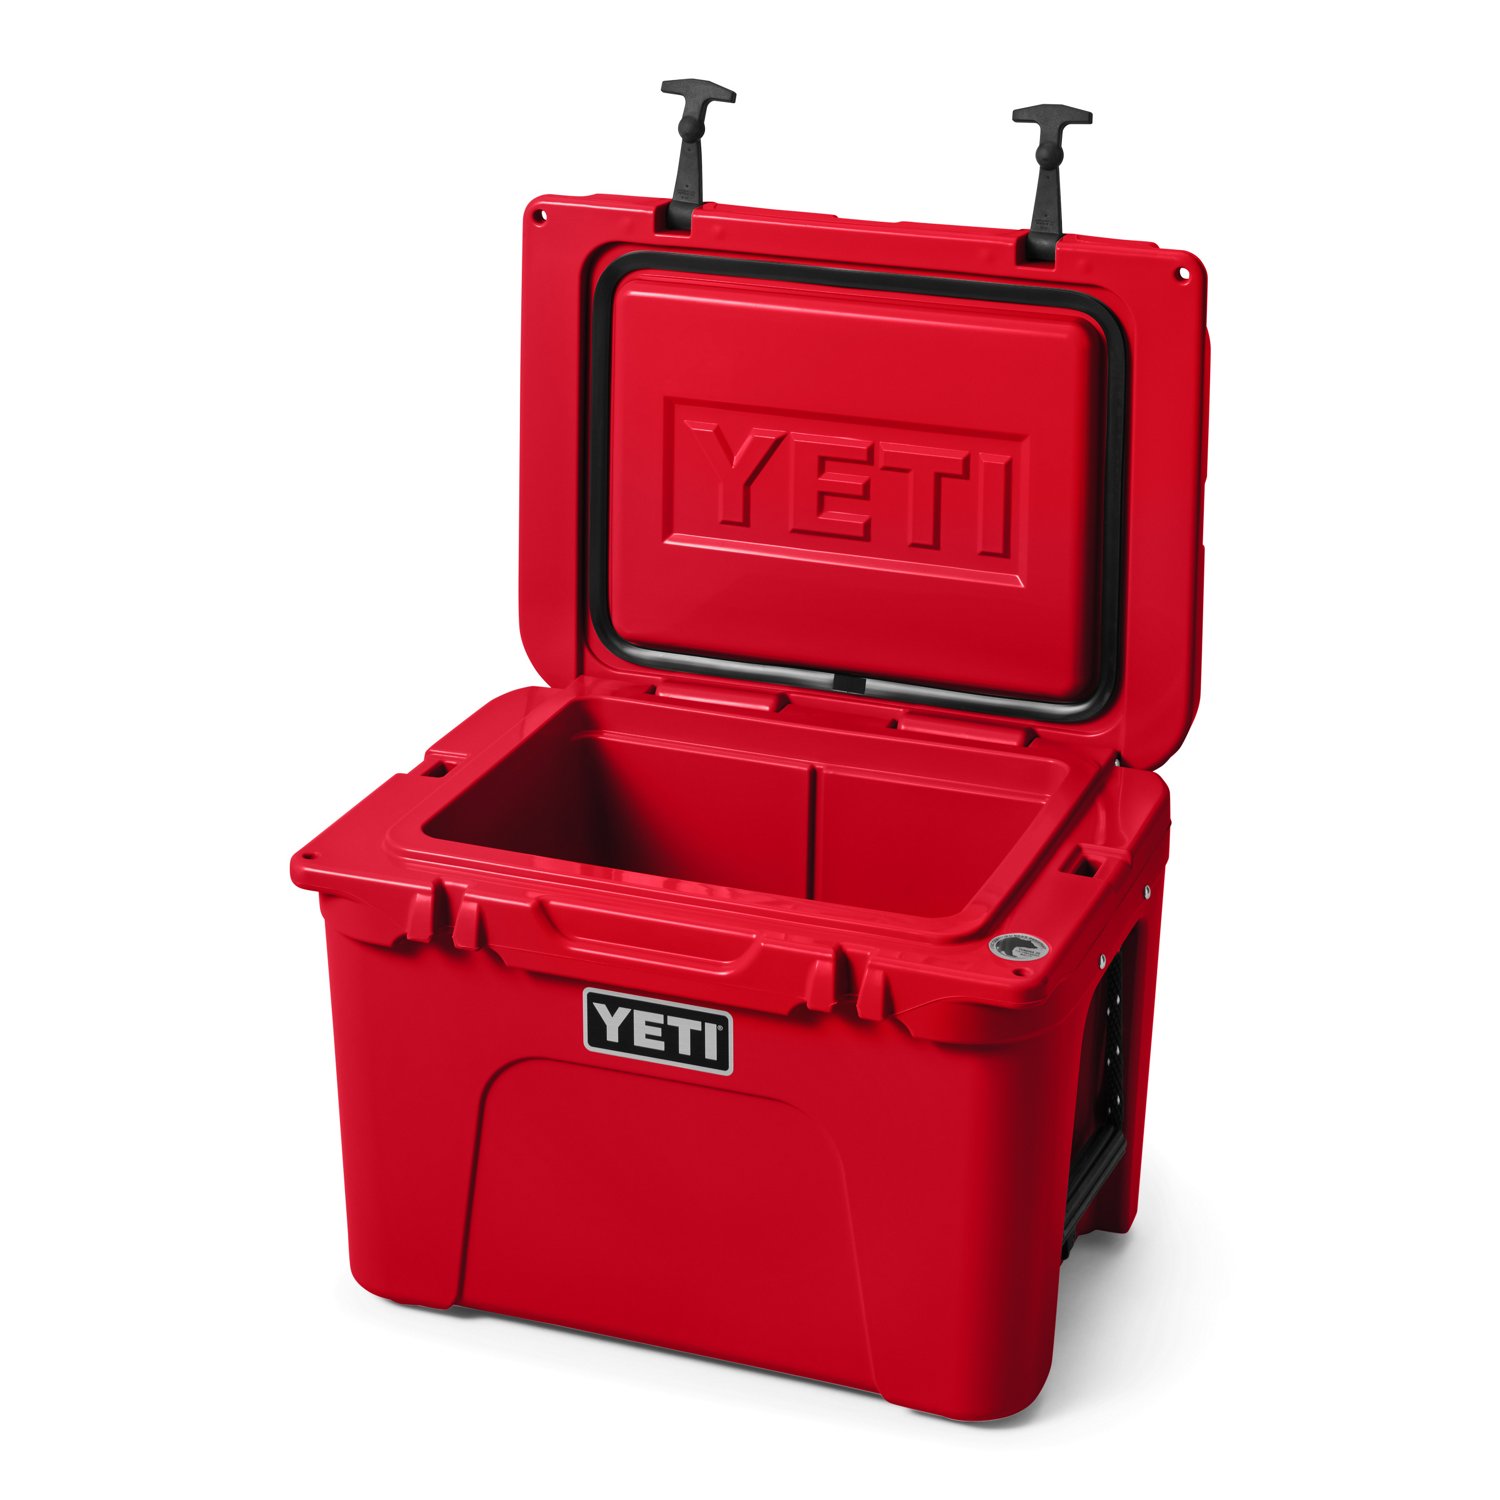 https://academy.scene7.com/is/image/academy//coolers/yeti-tundra-35-cooler-10035350000-red/ea9842c6d6ec458085416d8ae595c8c7?$pdp-mobile-gallery-ng$